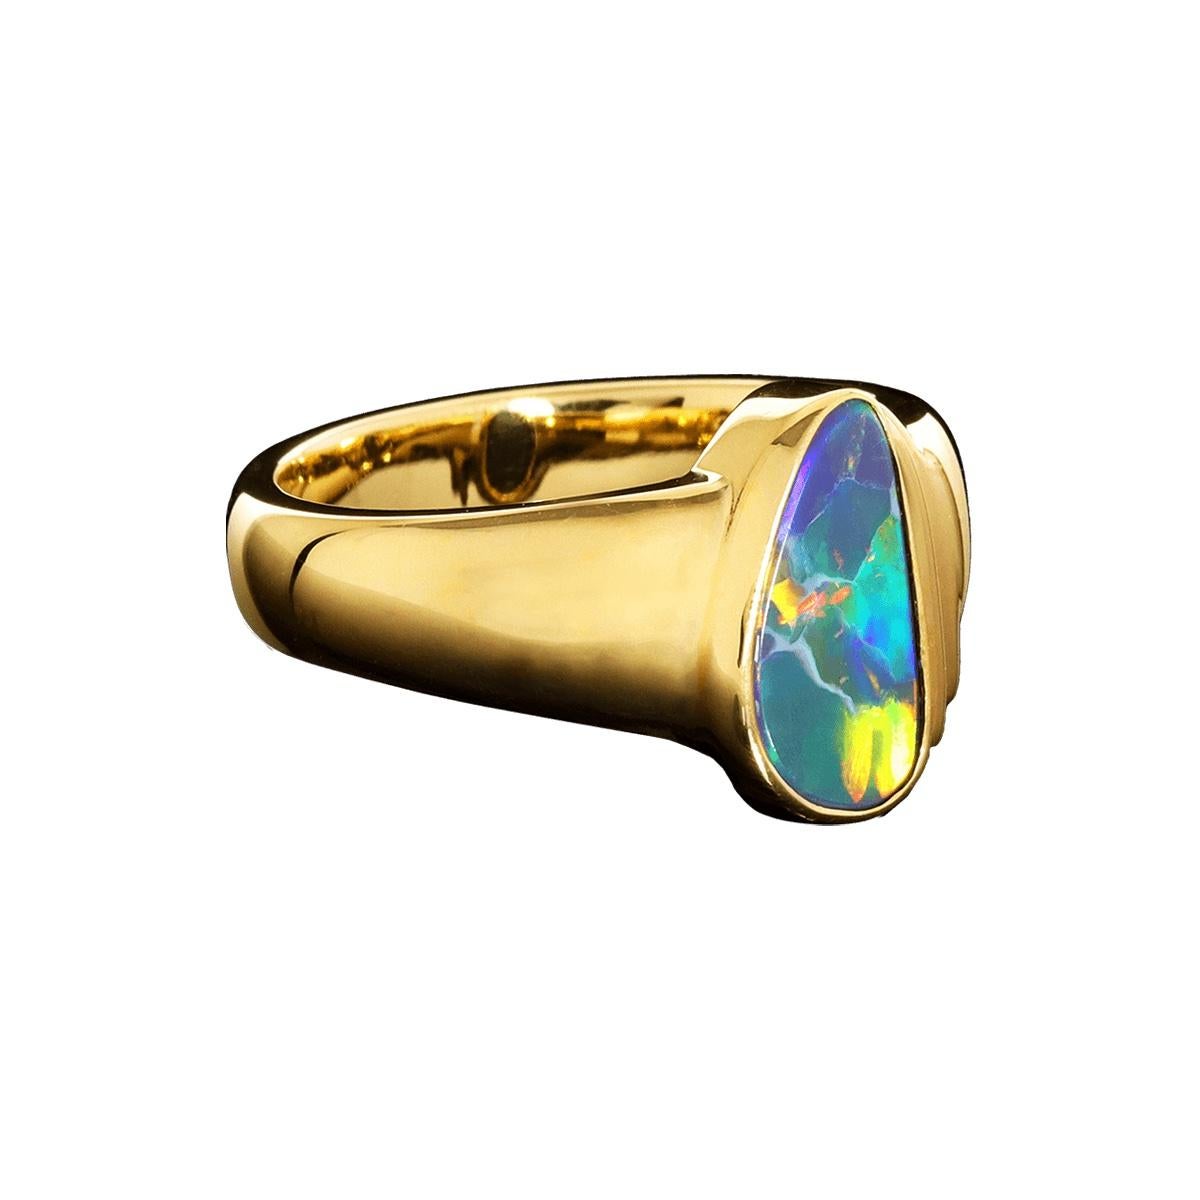 A beautiful flagstone pattern solid Australian Black Opal set in solid 18K gold and accented with brilliant white diamonds. A ring for every occasion and perfect to be worn daily. High-quality gem-grade Black Opal with purples, blues, yellows,